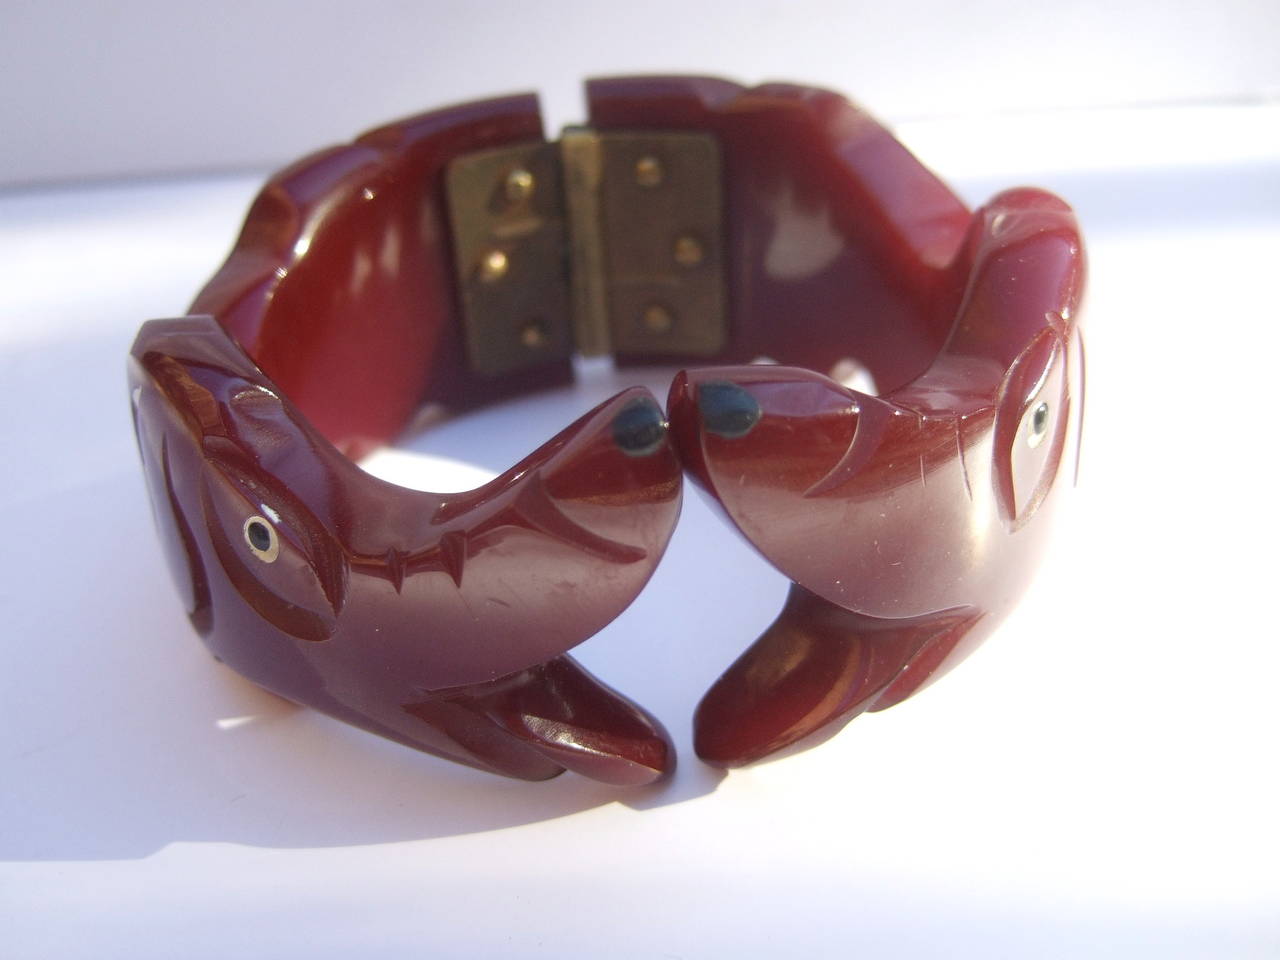 Spectacular Art Deco carved bakelite hounds clamper bracelet c 1930s
The amazing bakelite hinged bracelet is designed with a pair of hounds facing each other. The extraordinary carved bracelet is designed with a cinnabar color bakelite with enamel